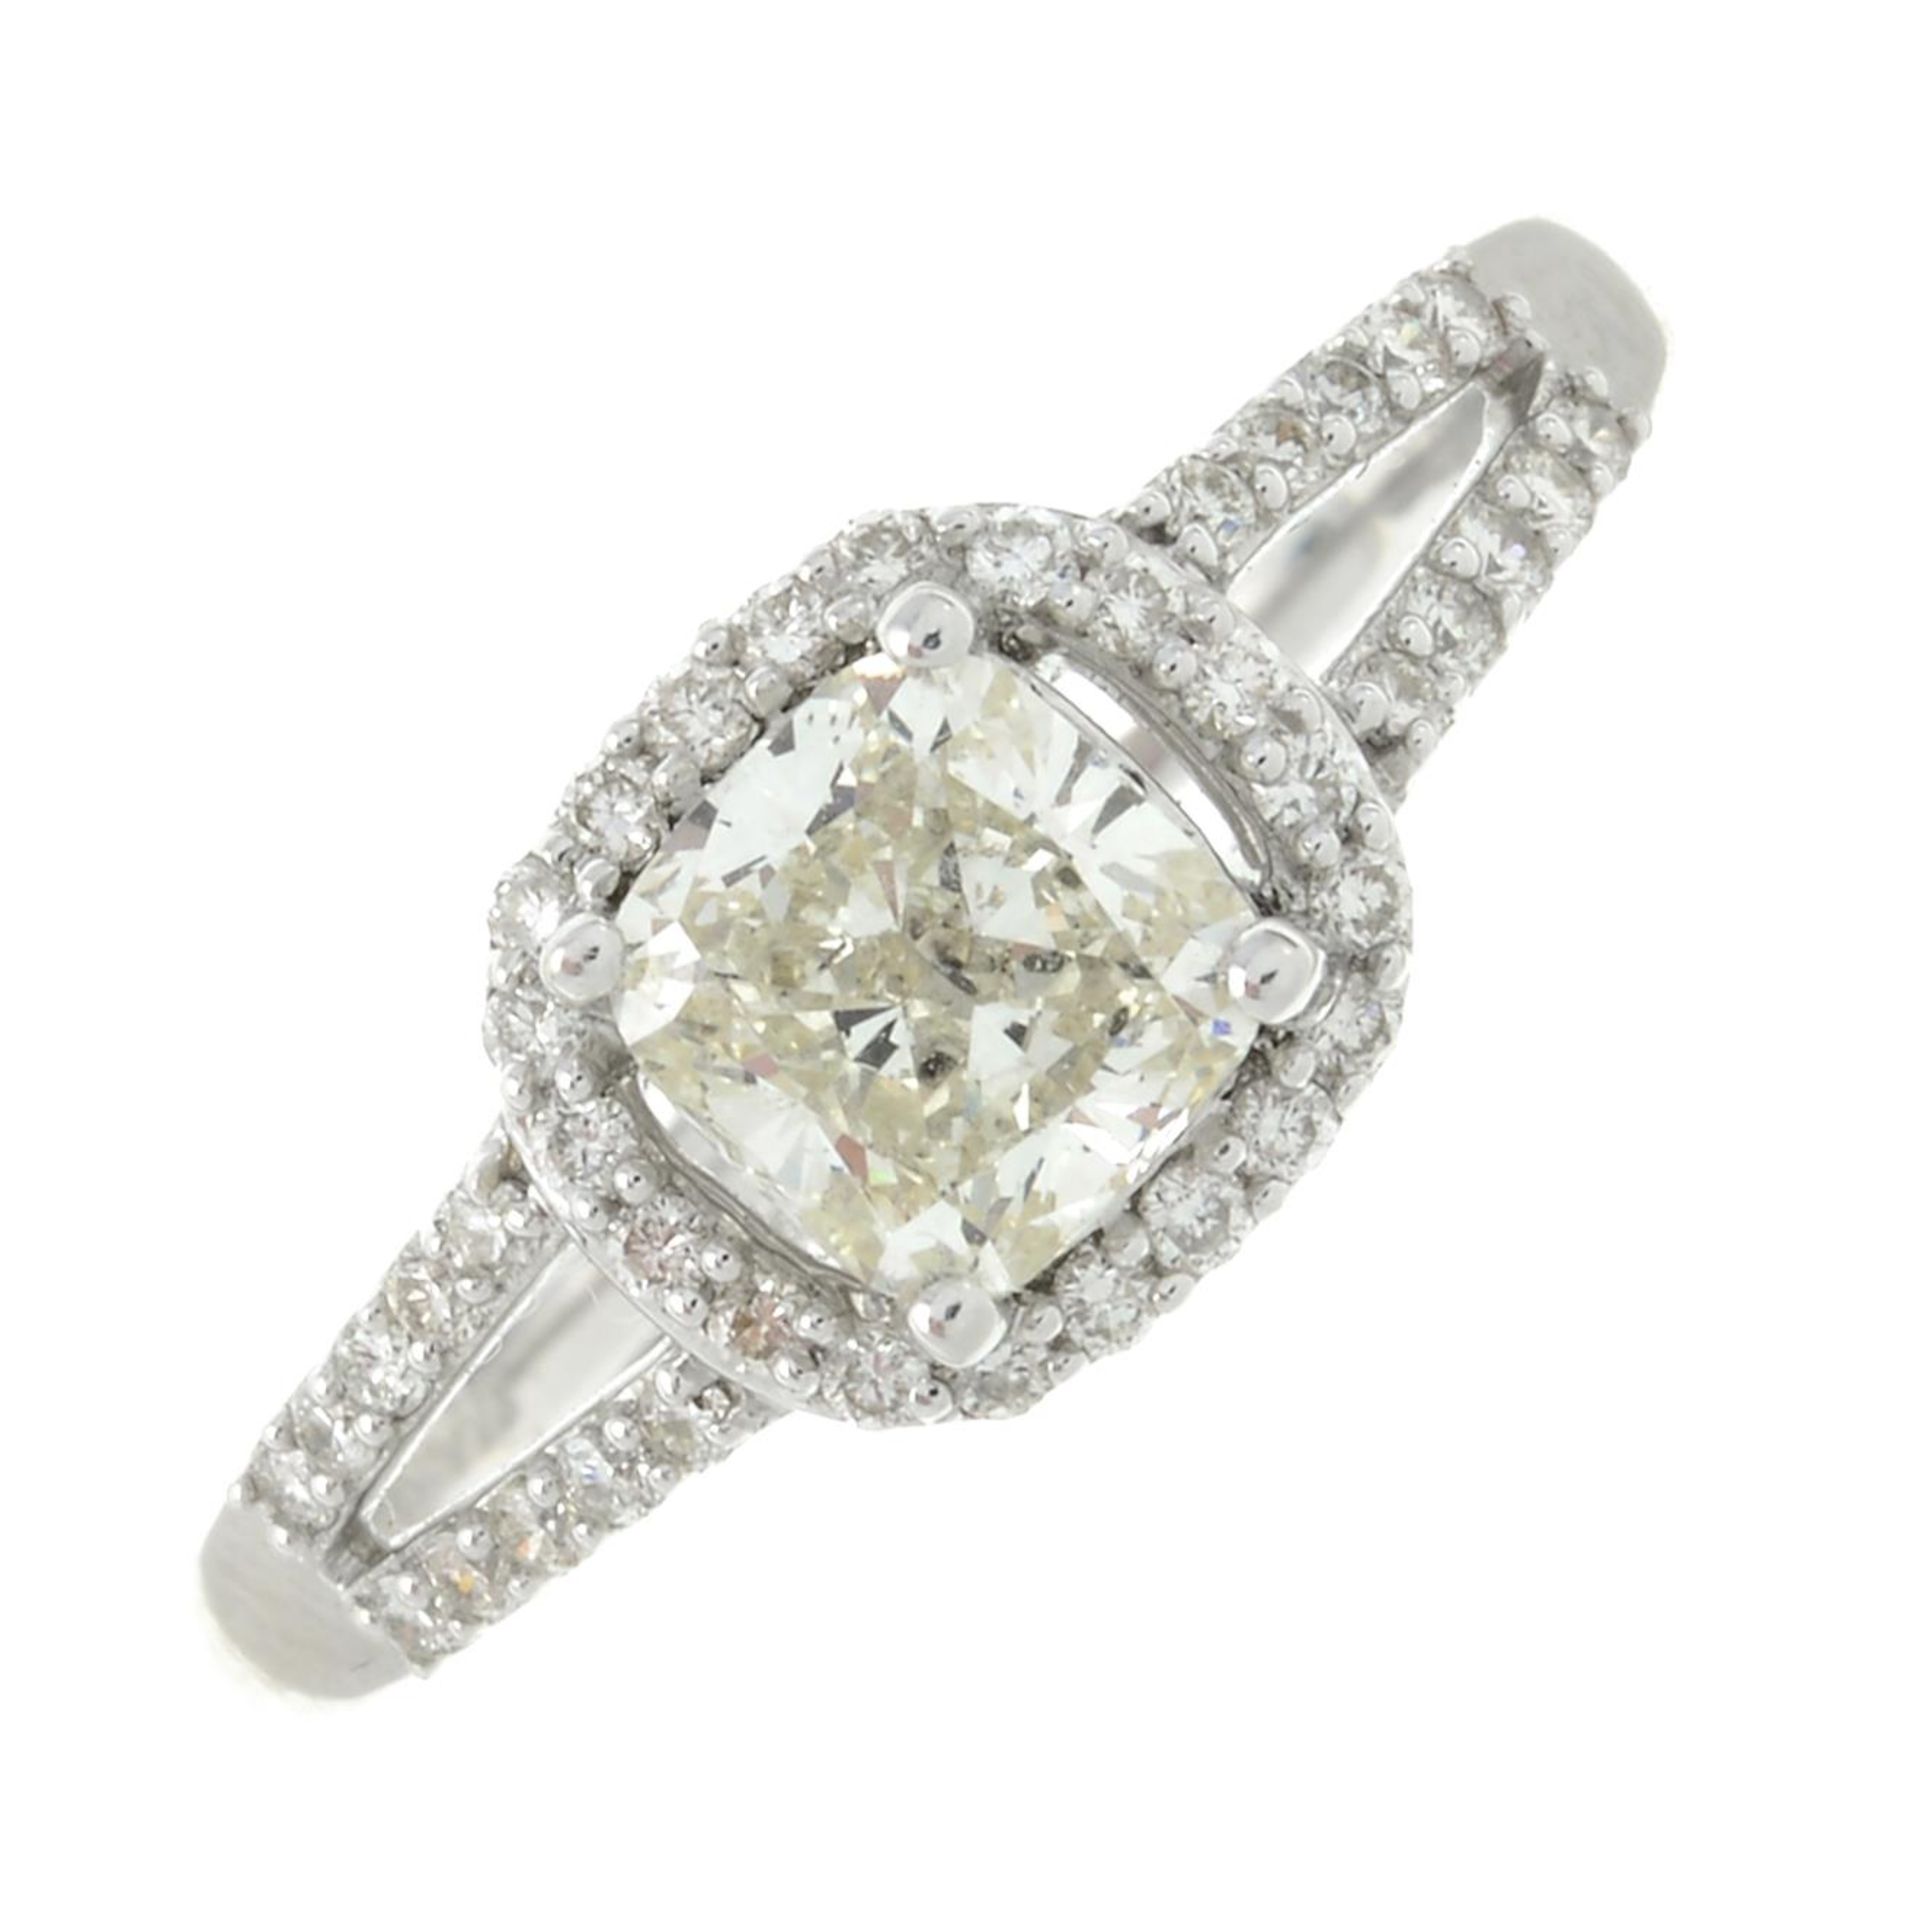 An 18ct gold square-shape diamond ring, within a brilliant-cut diamond surround and sides.